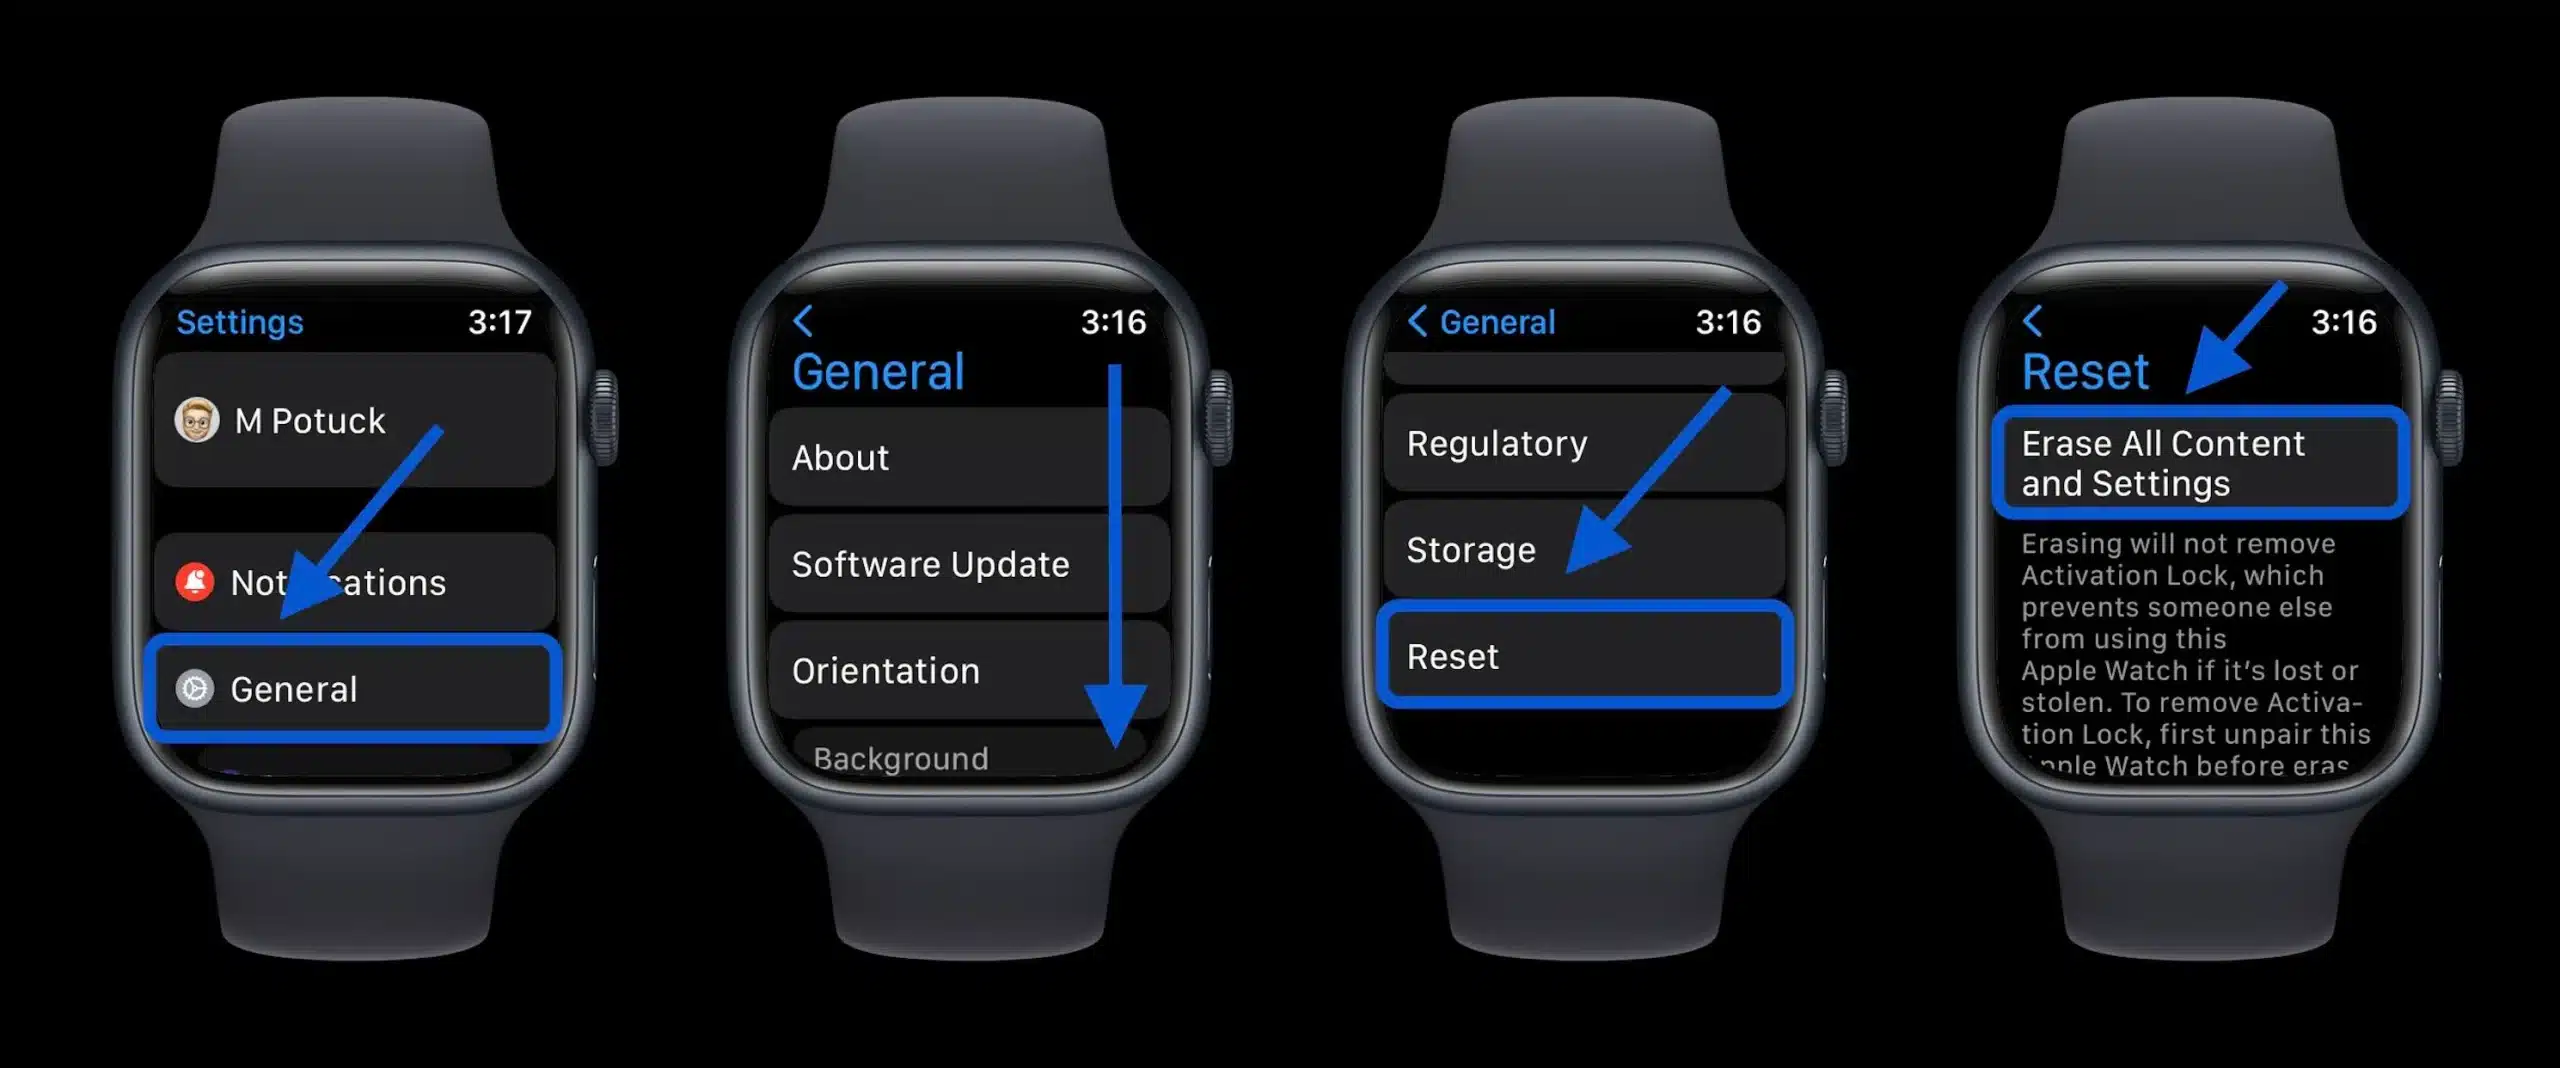 how to reset an apple watch